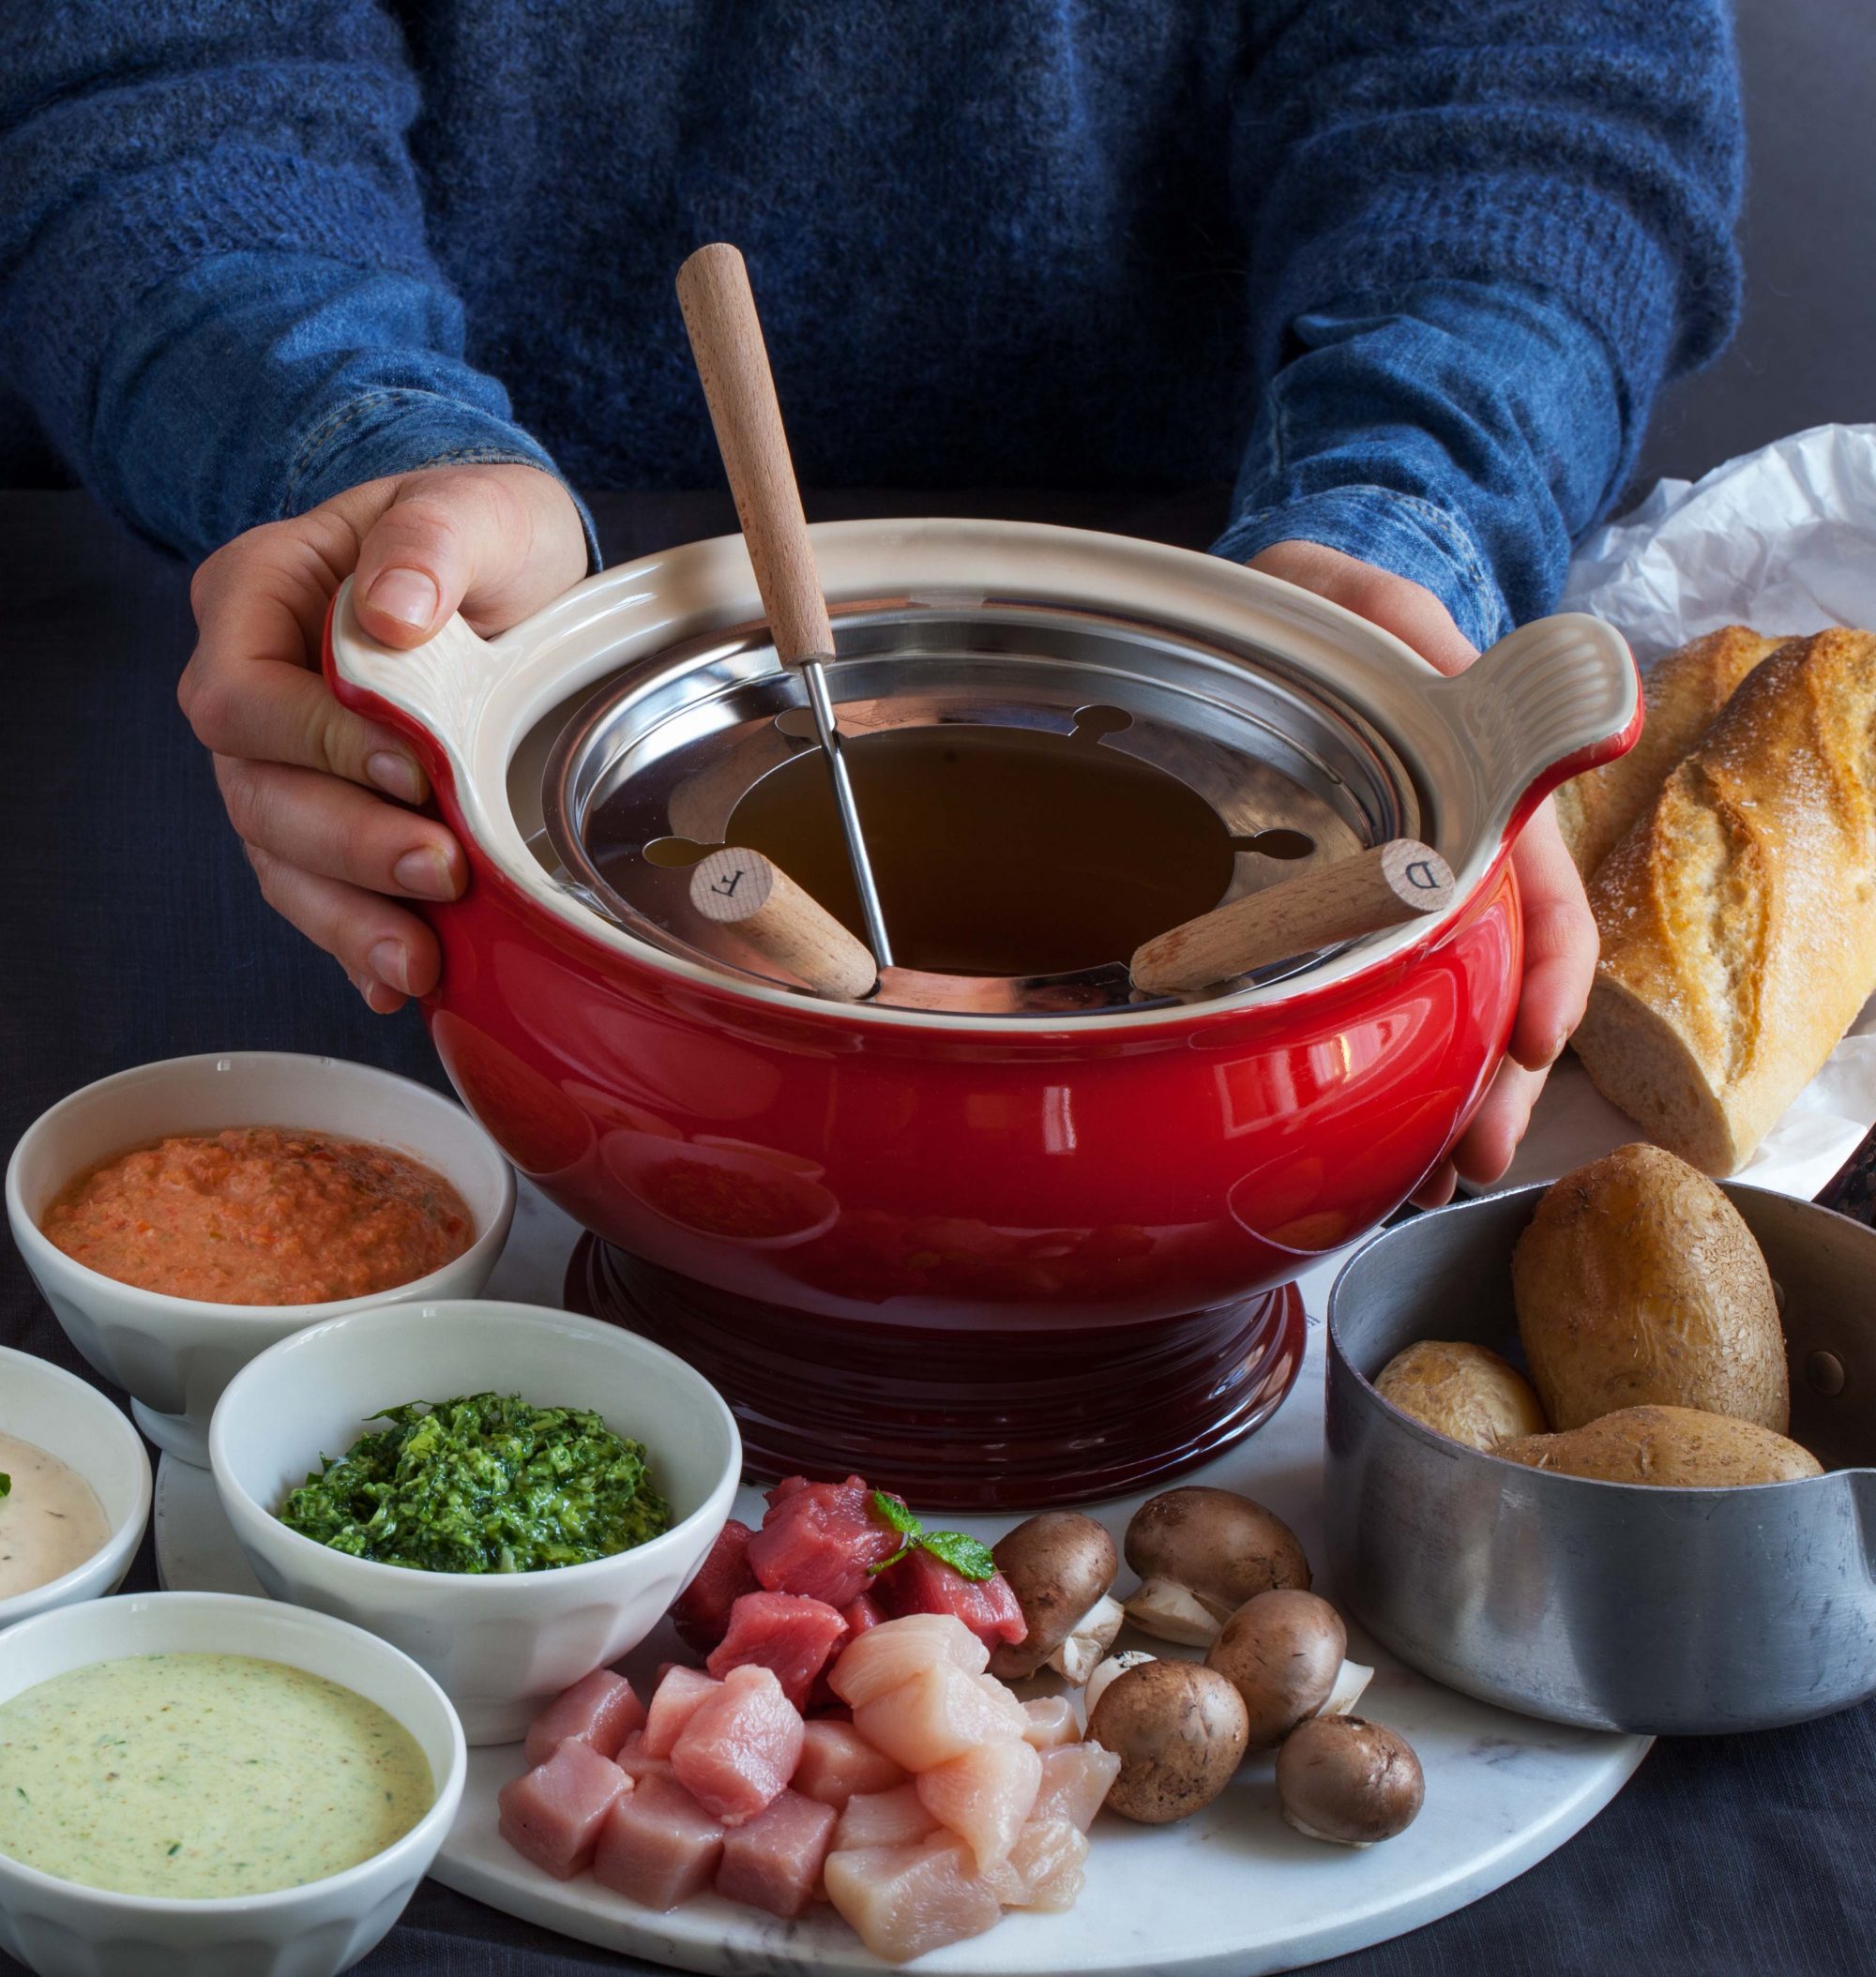 Meat Fondue or Hot Pot for Christmas? - Foodtastic